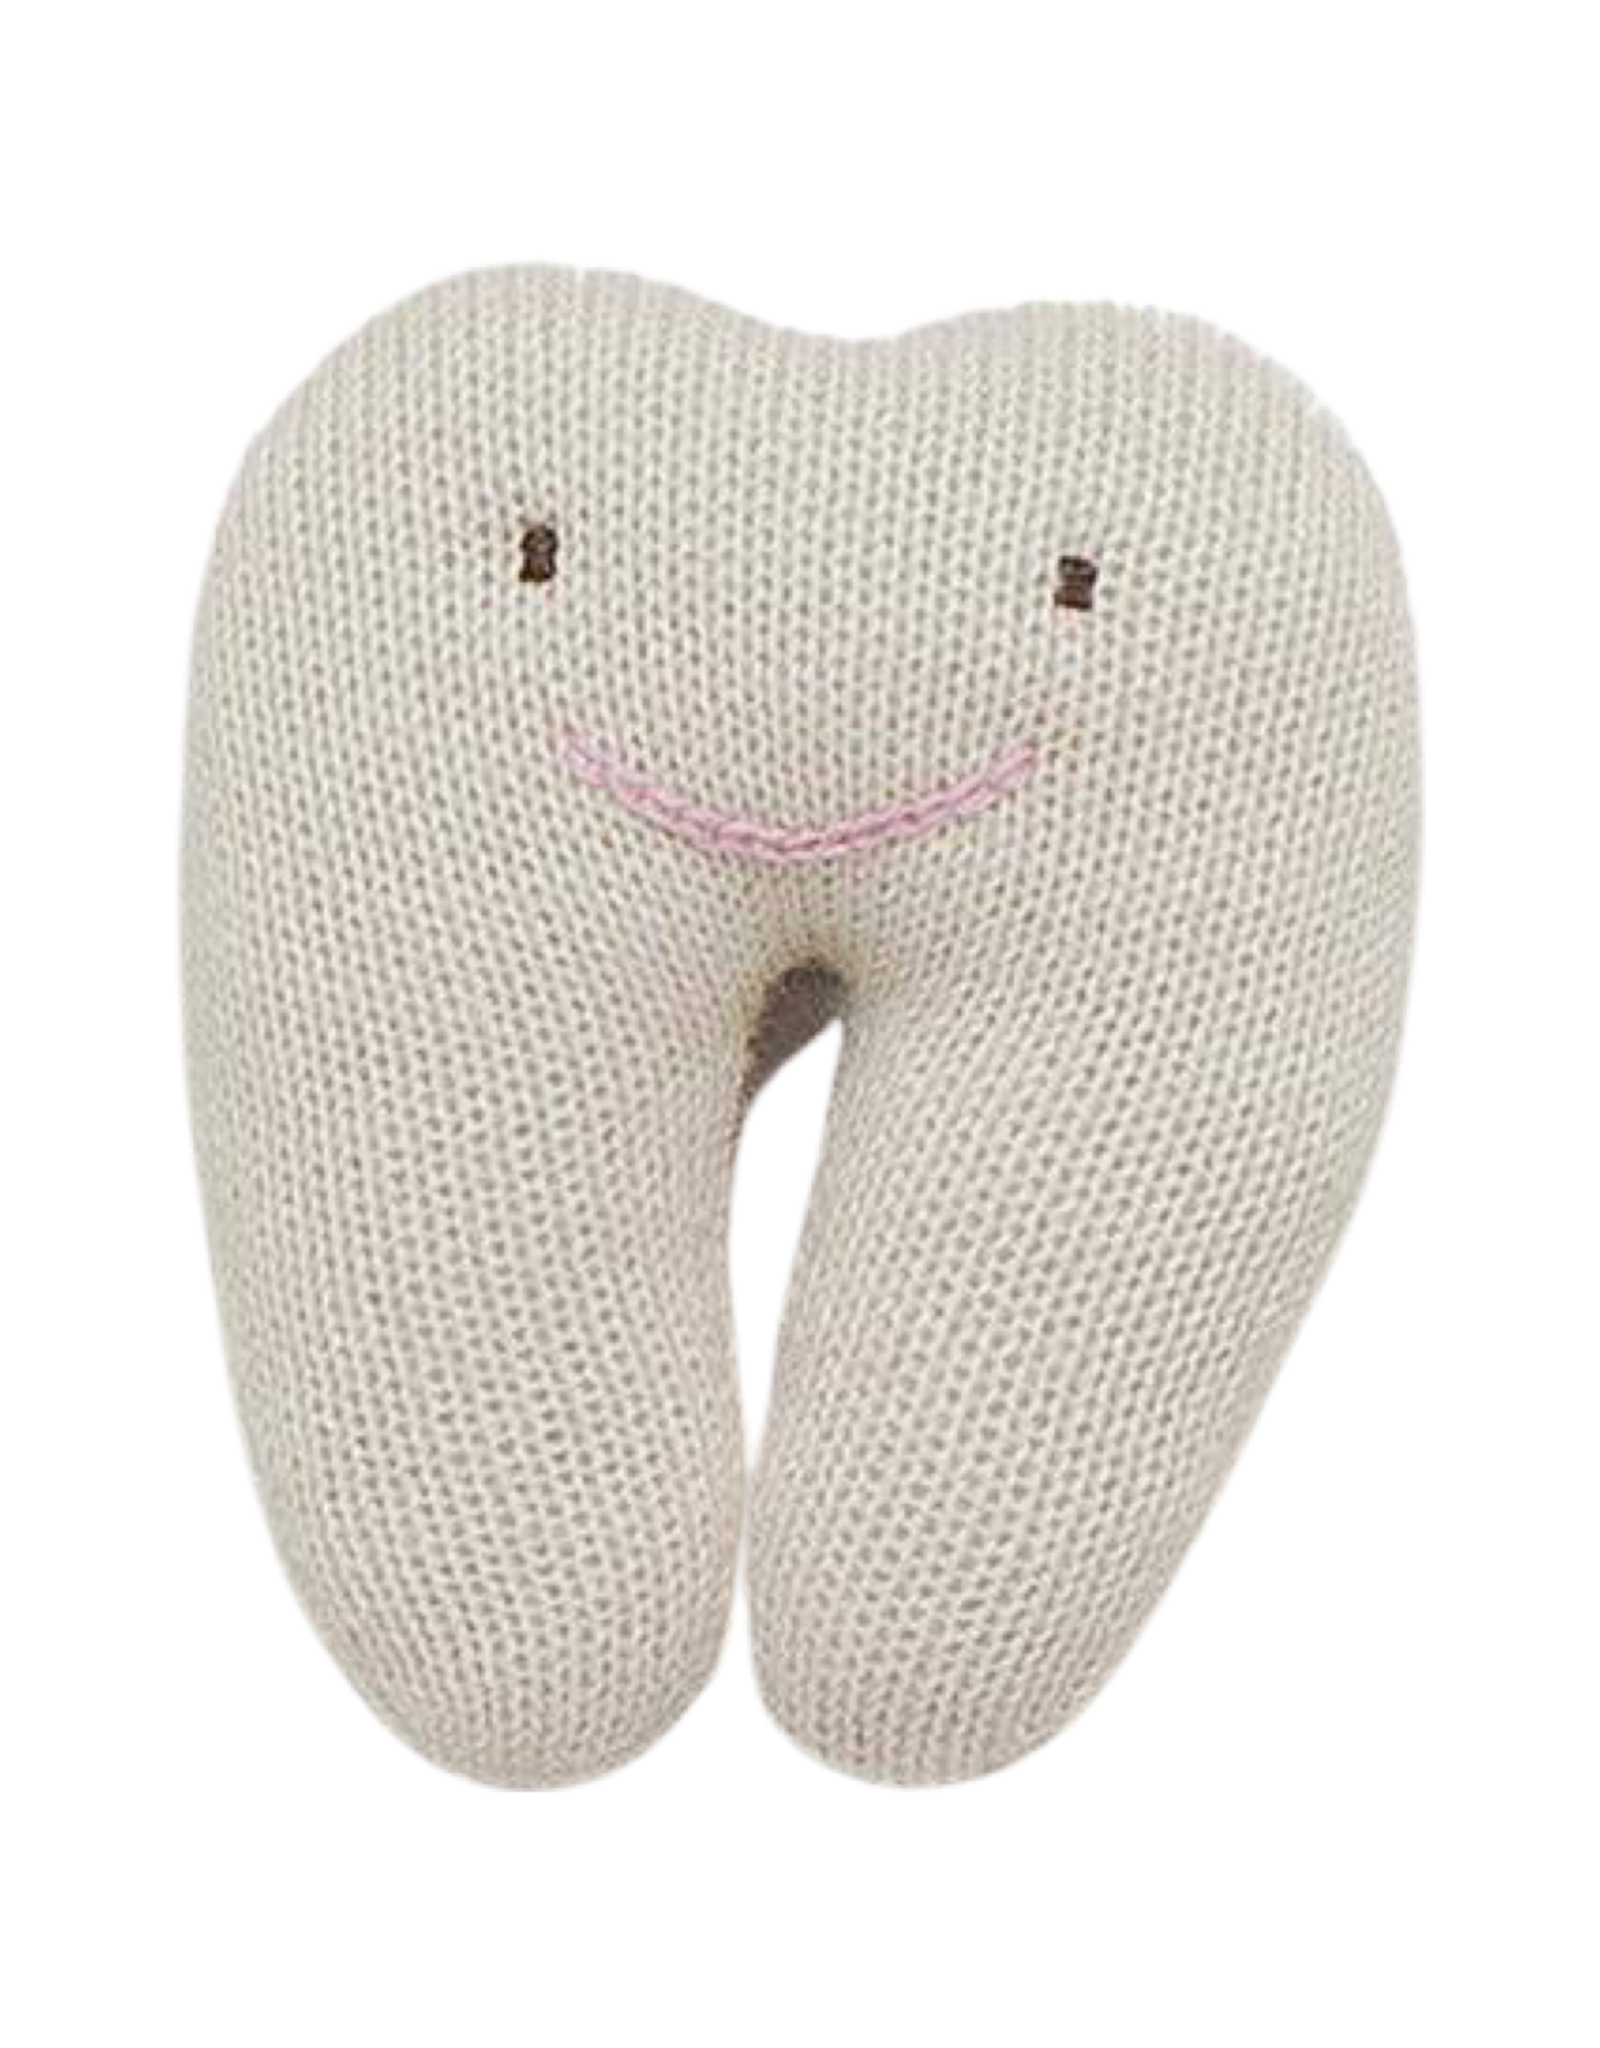 Oeuf Tooth Pillow